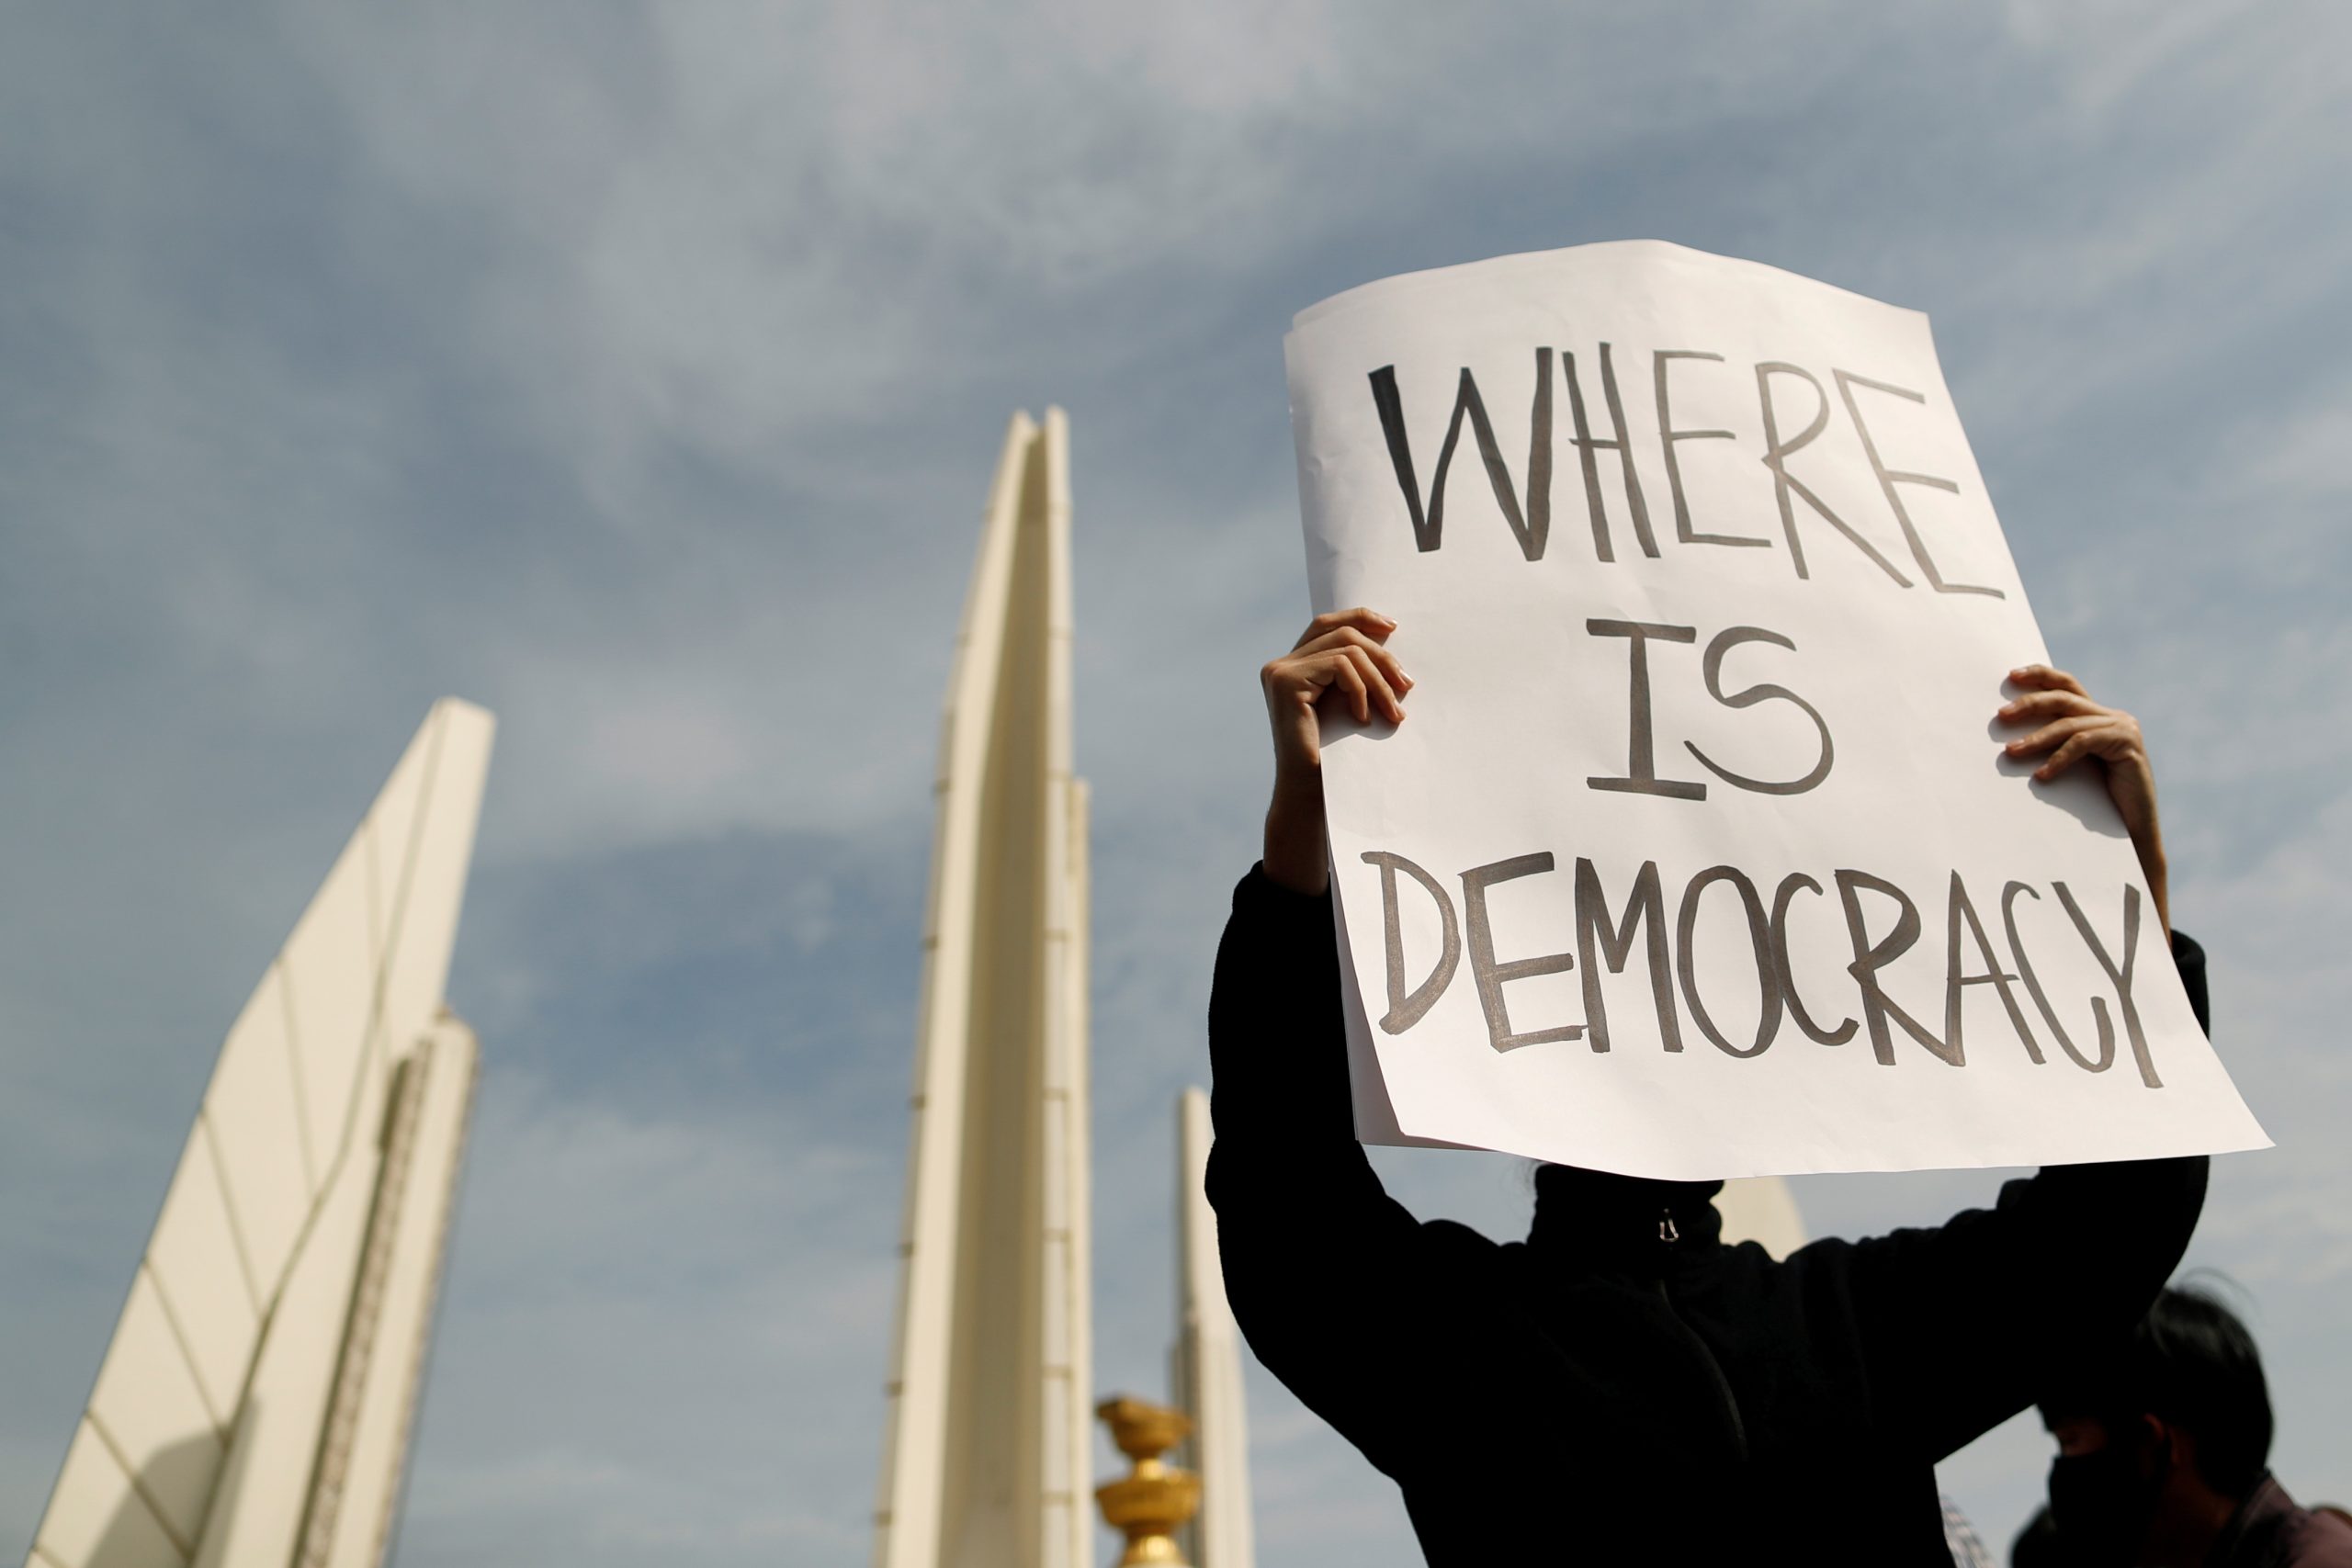 A protester's face is hidden behind a sign he is carrying that reads 'Where is democracy'